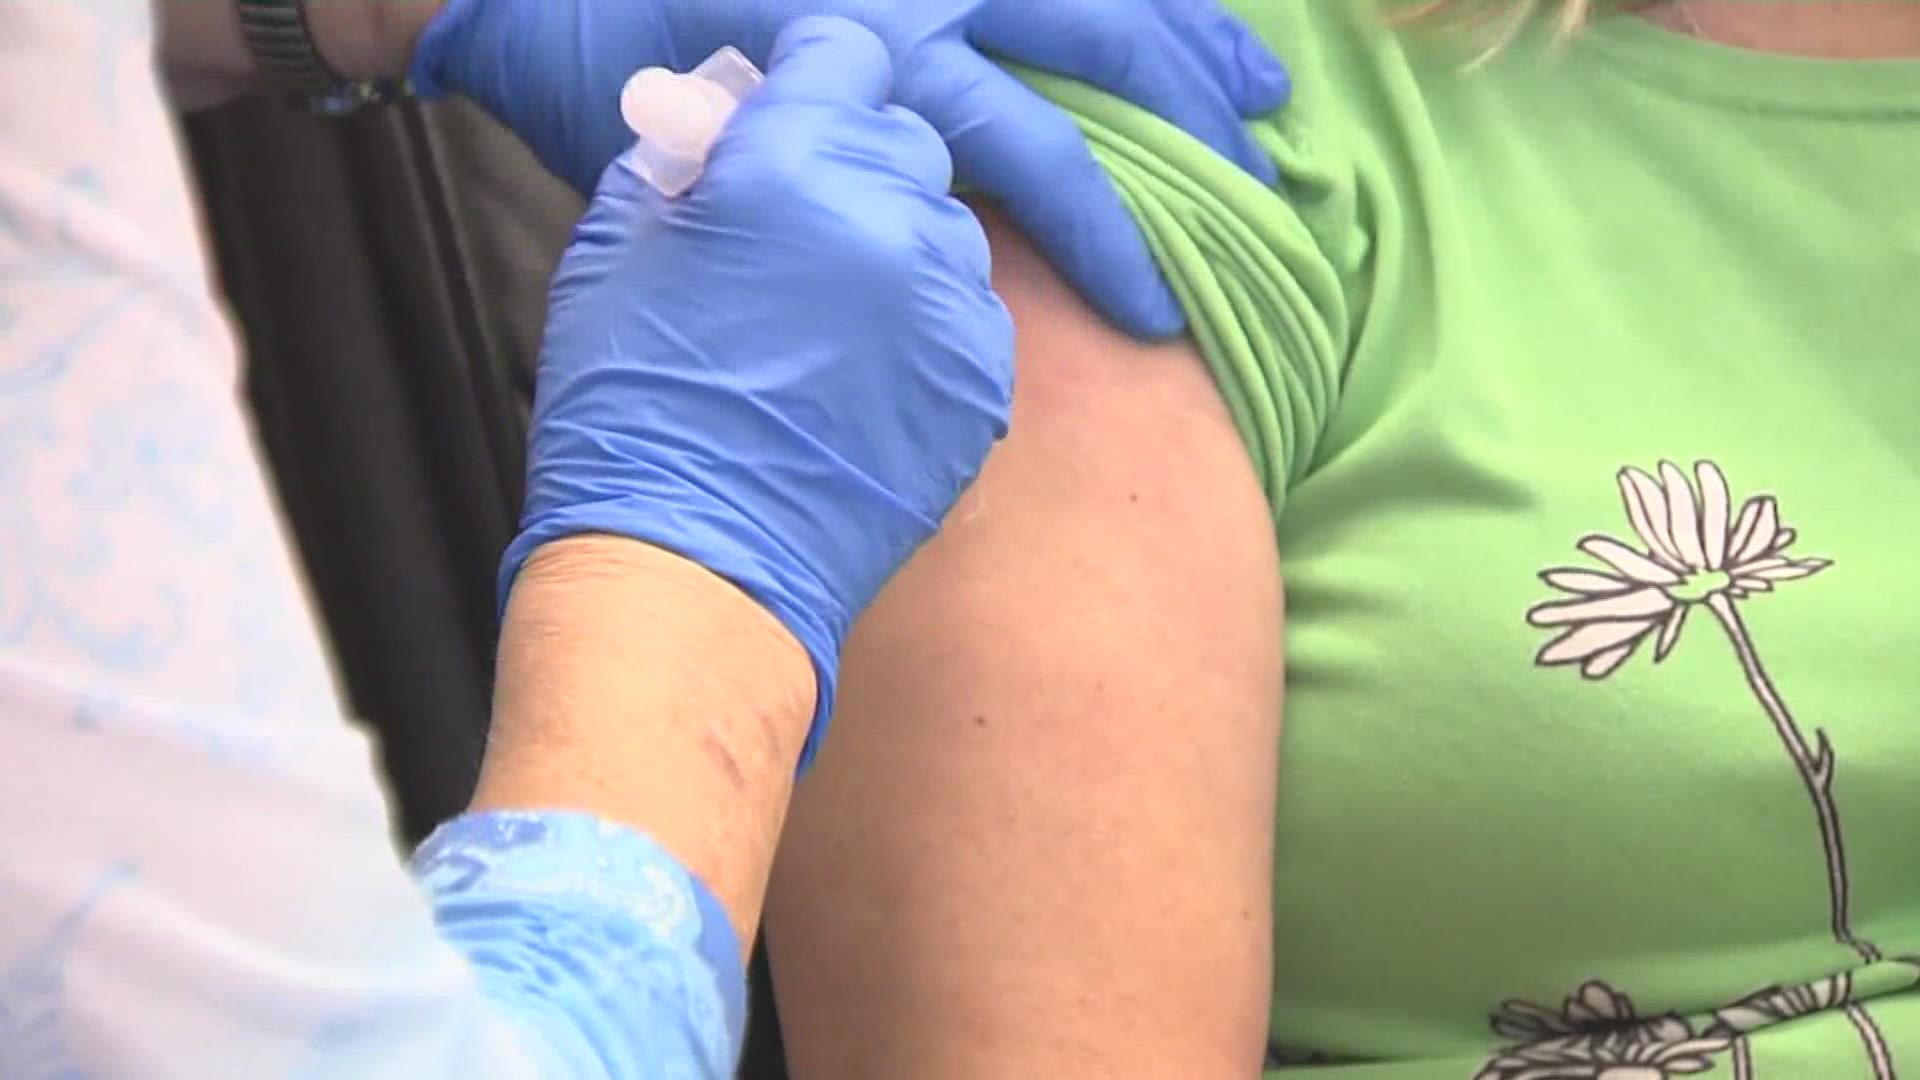 9NEWS Health Expert Dr. Payal Kohli says it's not too early to start thinking about getting a flu shot.